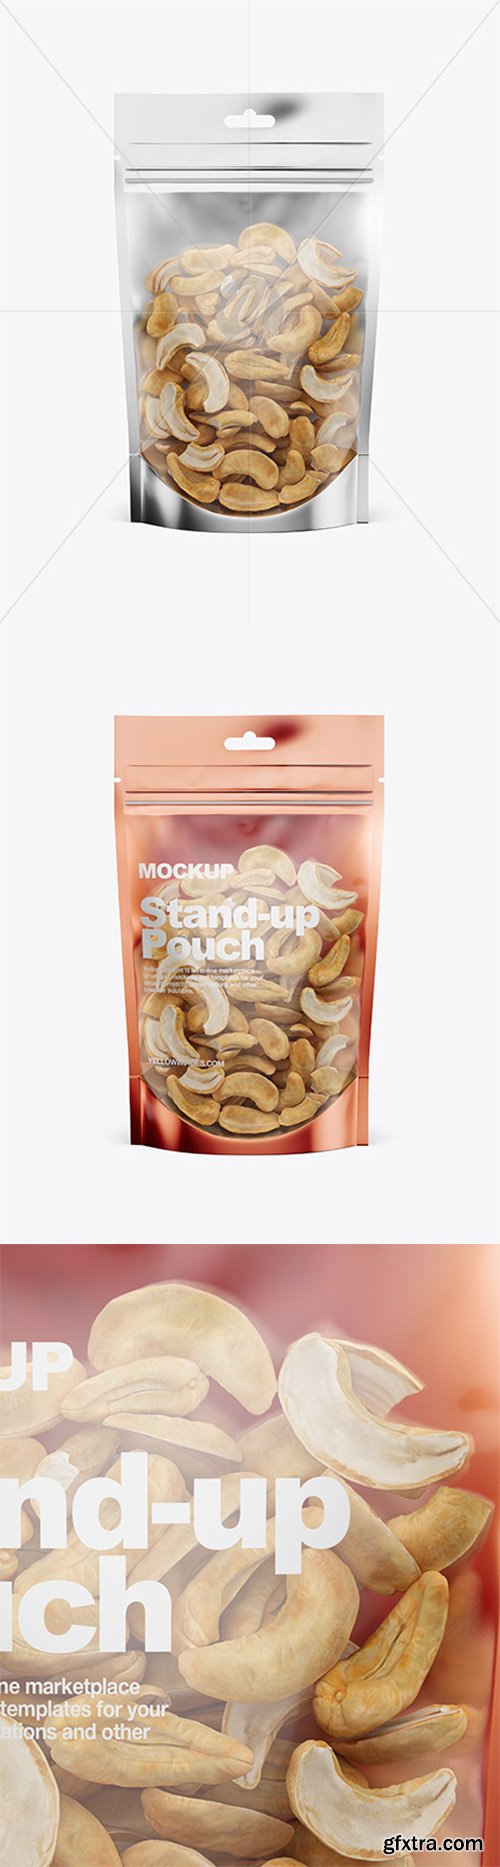 Glossy Transparent Stand-Up Pouch W/ Cashew Nuts Mockup - Front View 32894